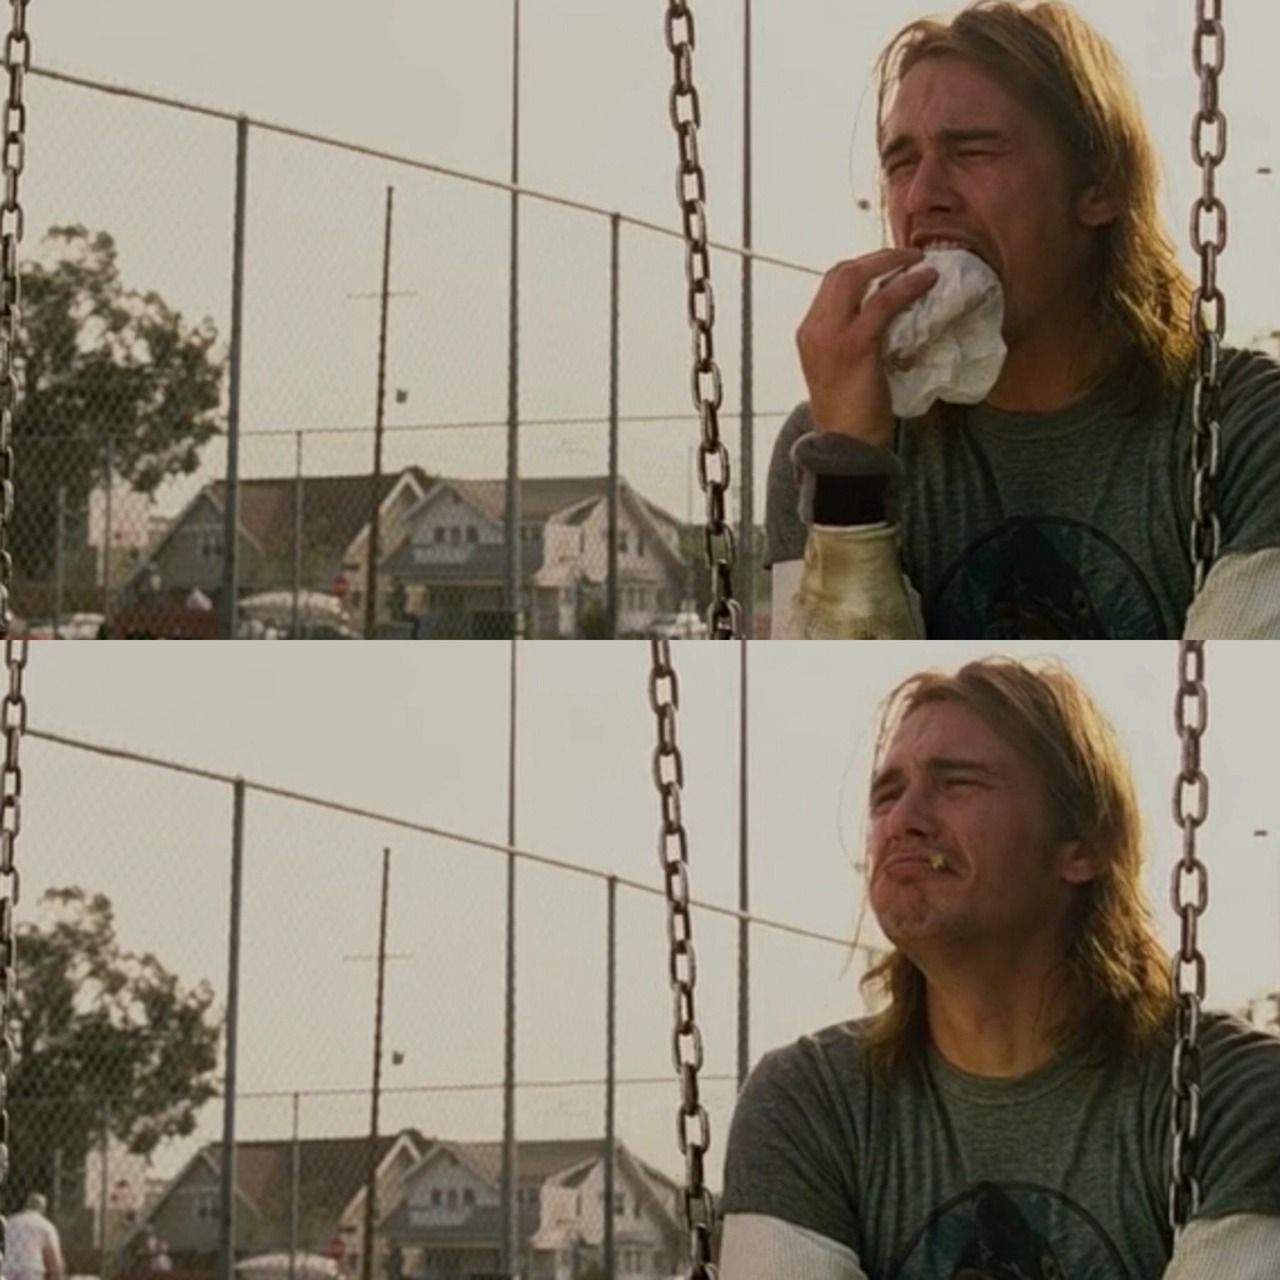 High Quality Pineapple Express Crying $7 Sandwich For $50 Uber Eats Blank Meme Template